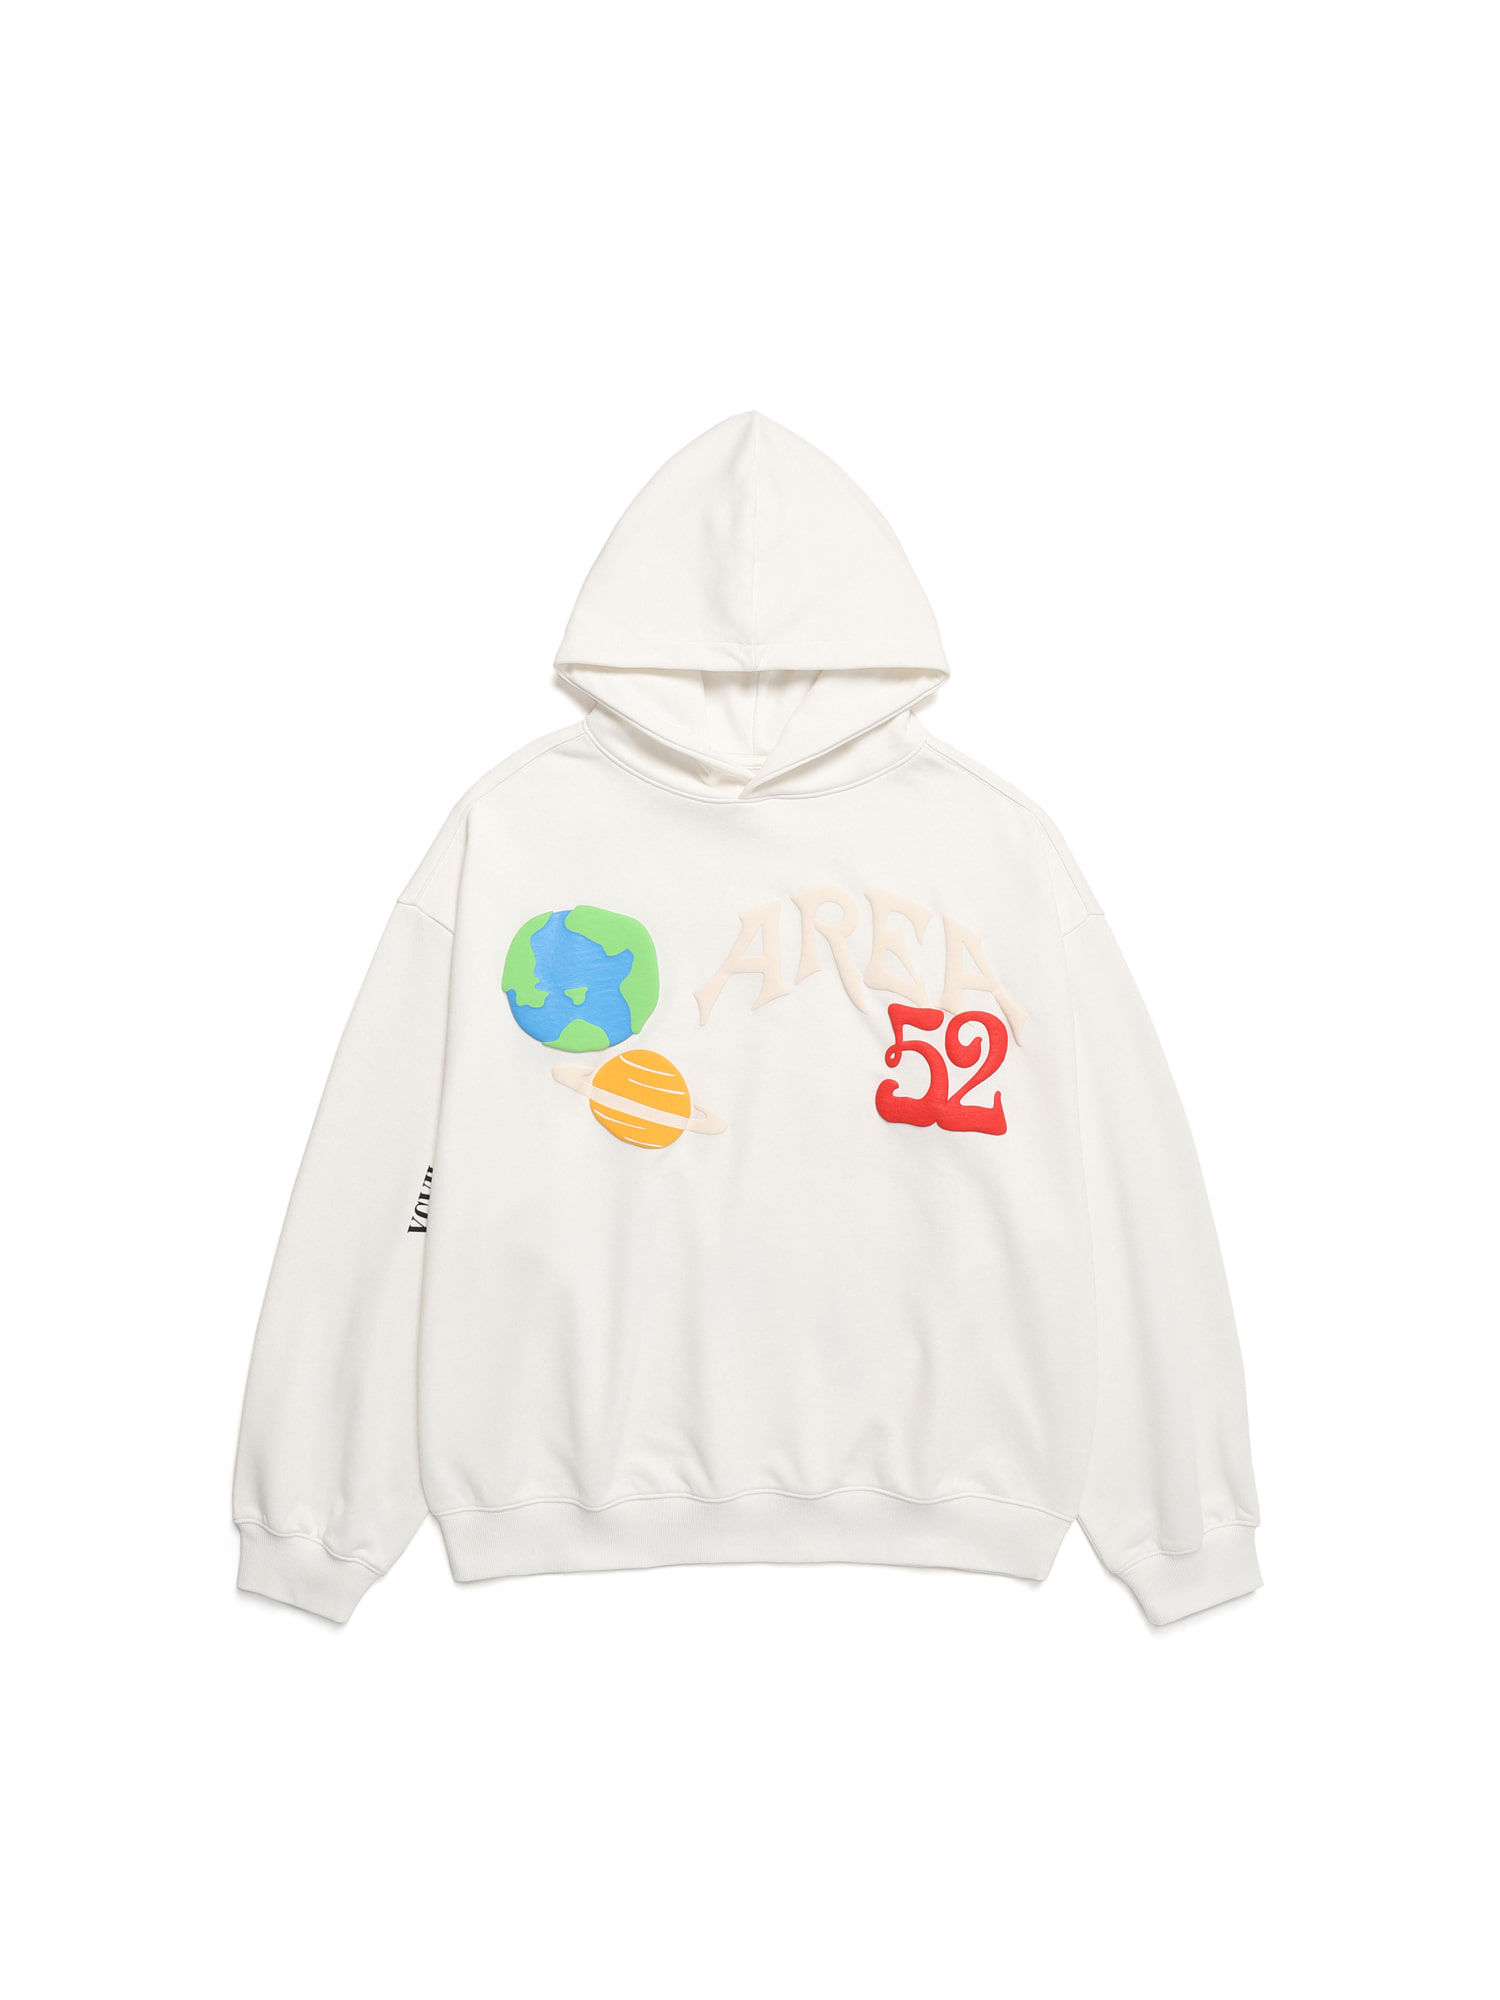 WD AREA 52 HOODIE WHITE